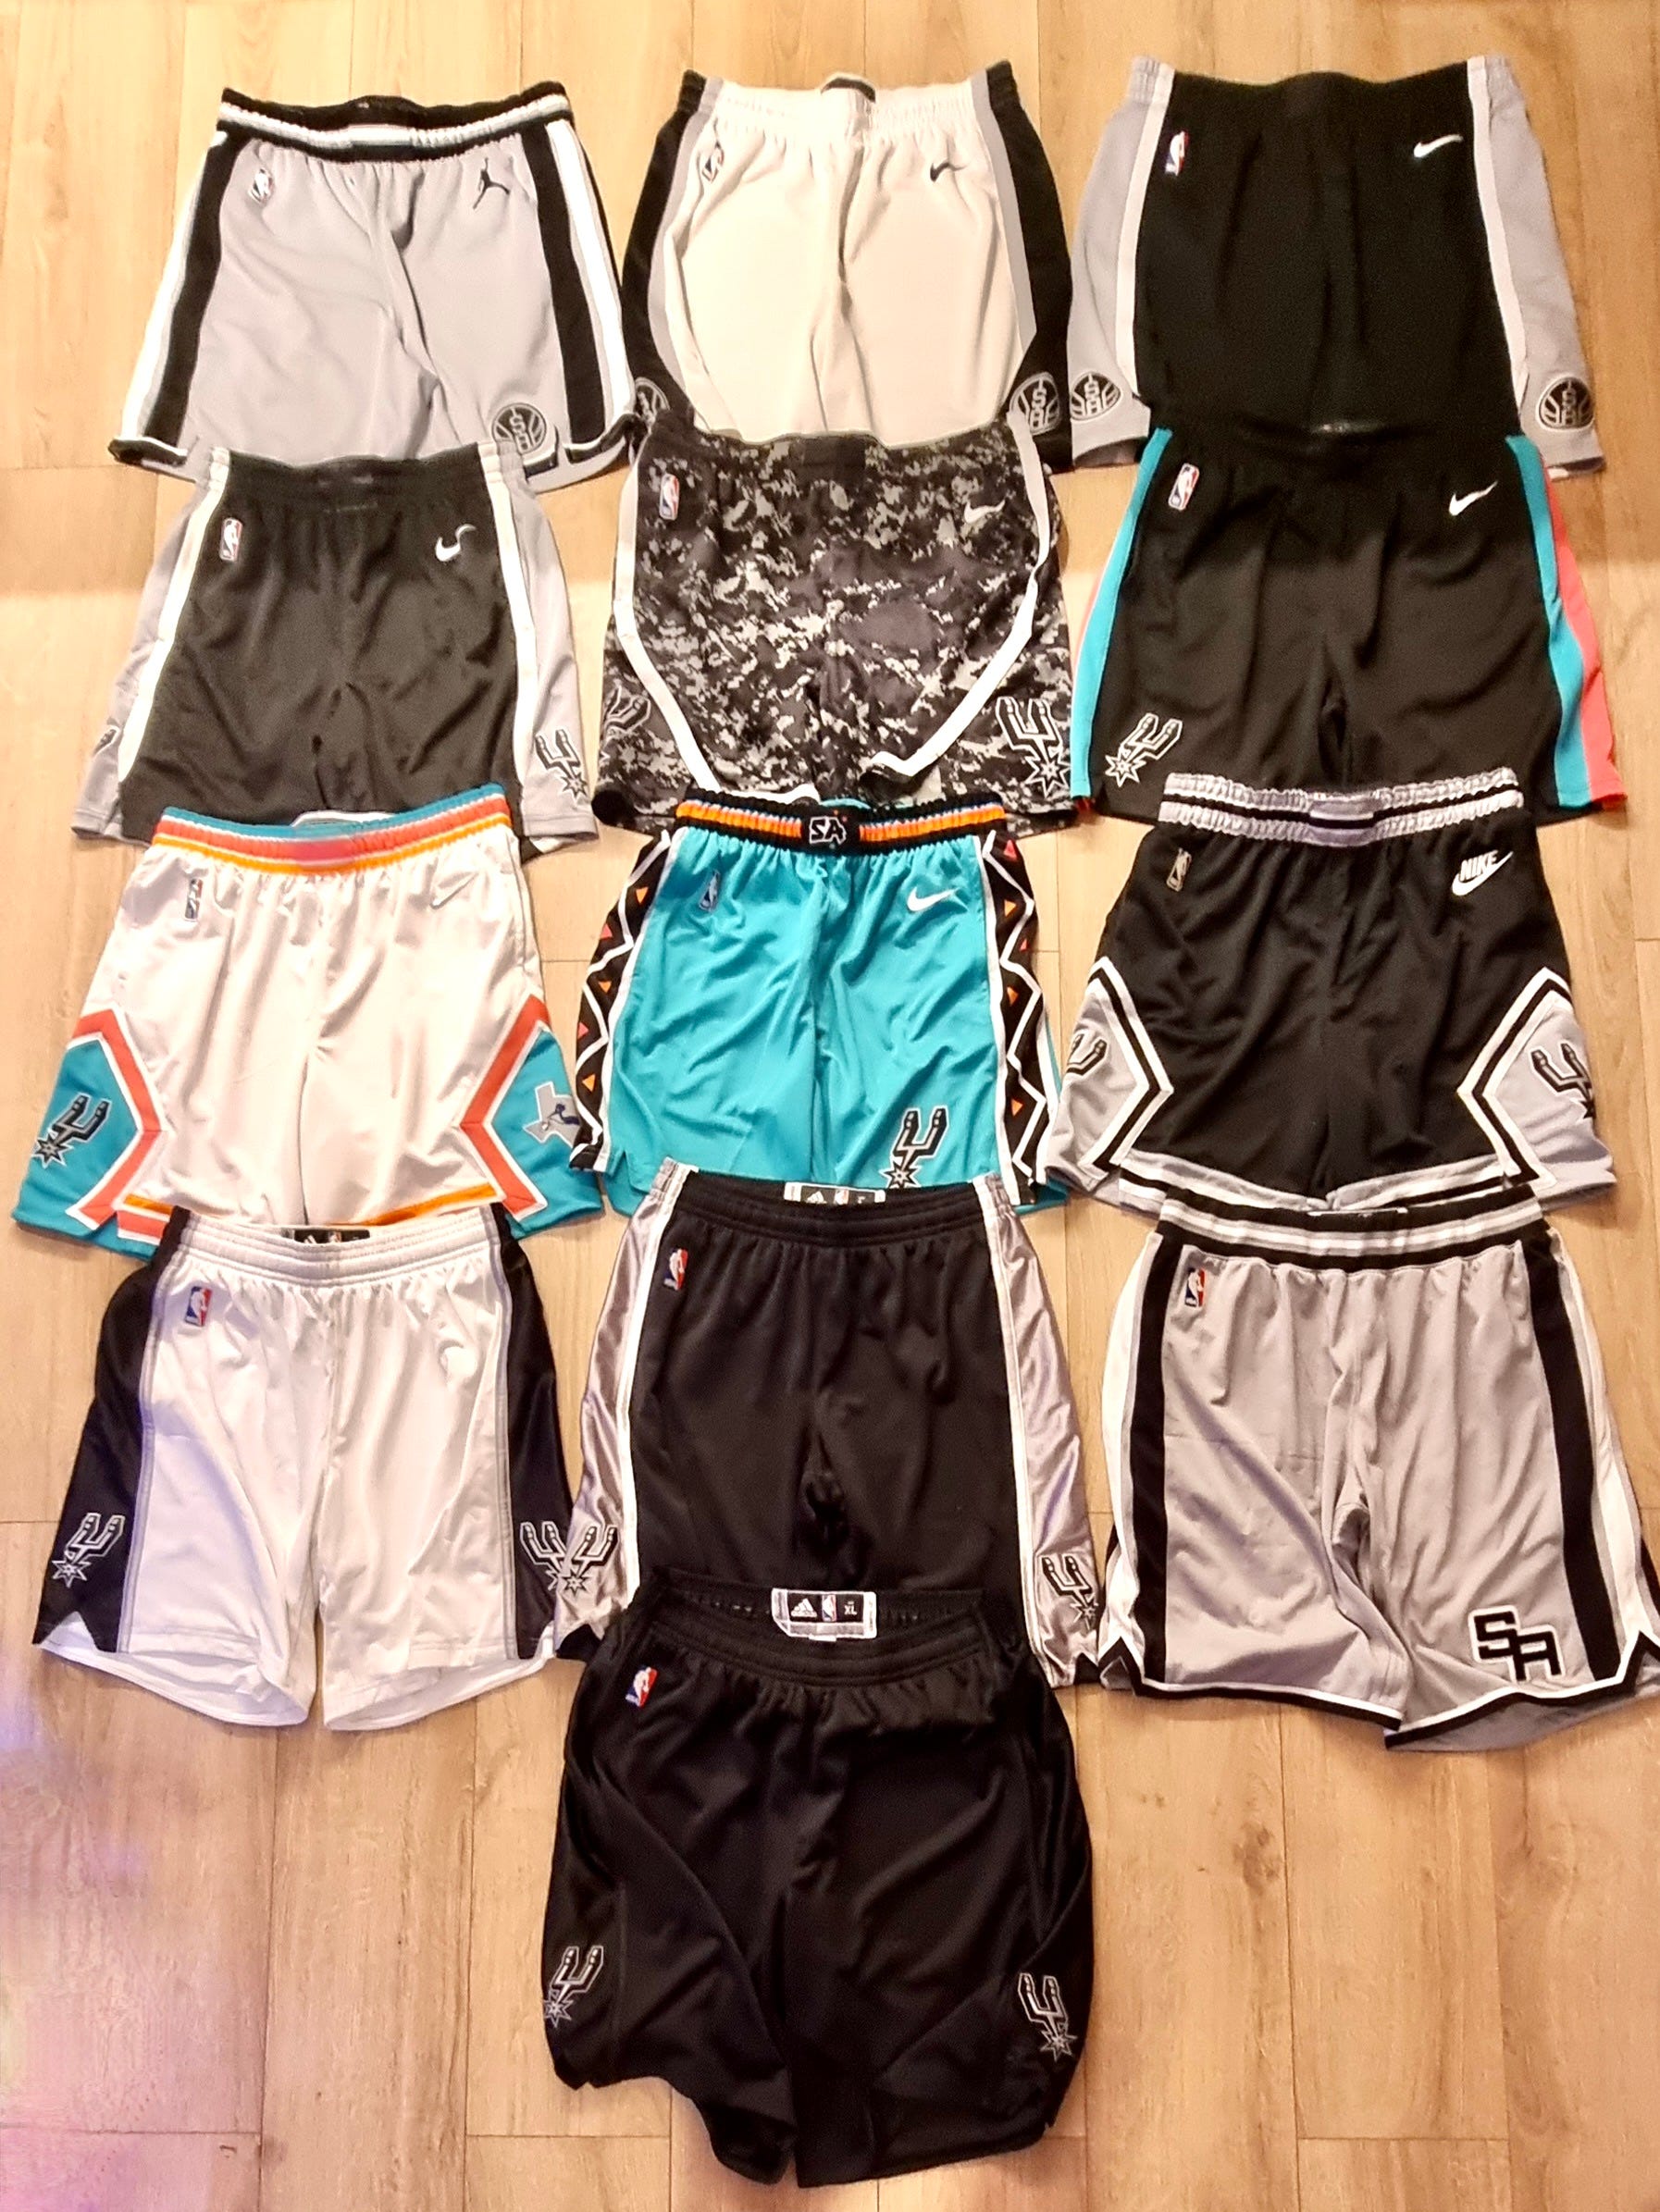 An Interview with an NBA Shorts Collector - by Paul Lukas